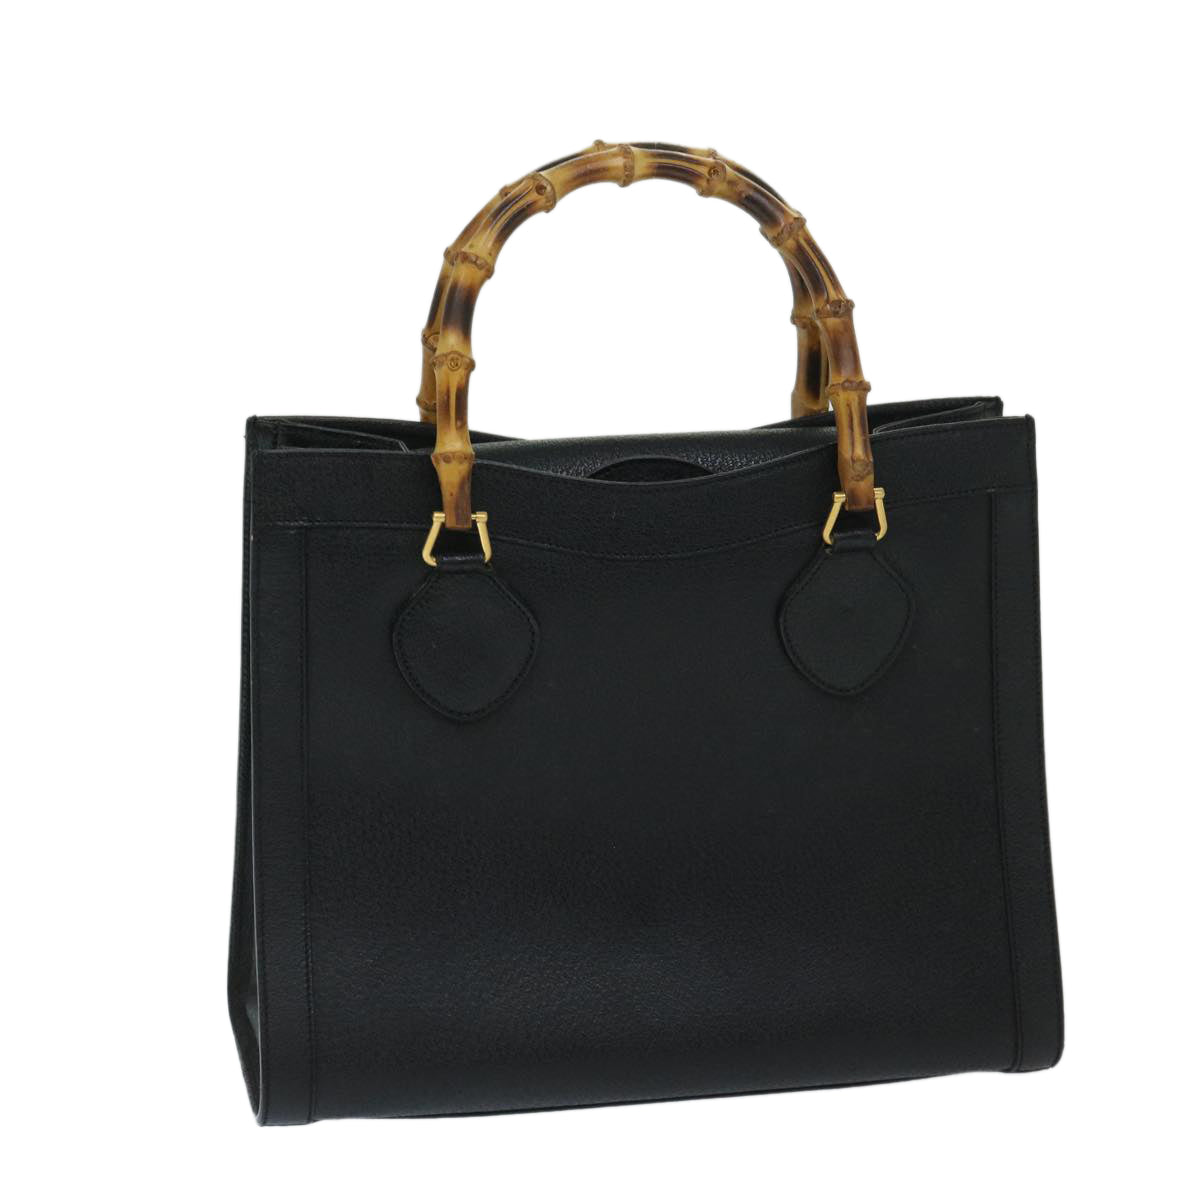 GUCCI Bamboo Tote Bag Leather Black Auth ep3669